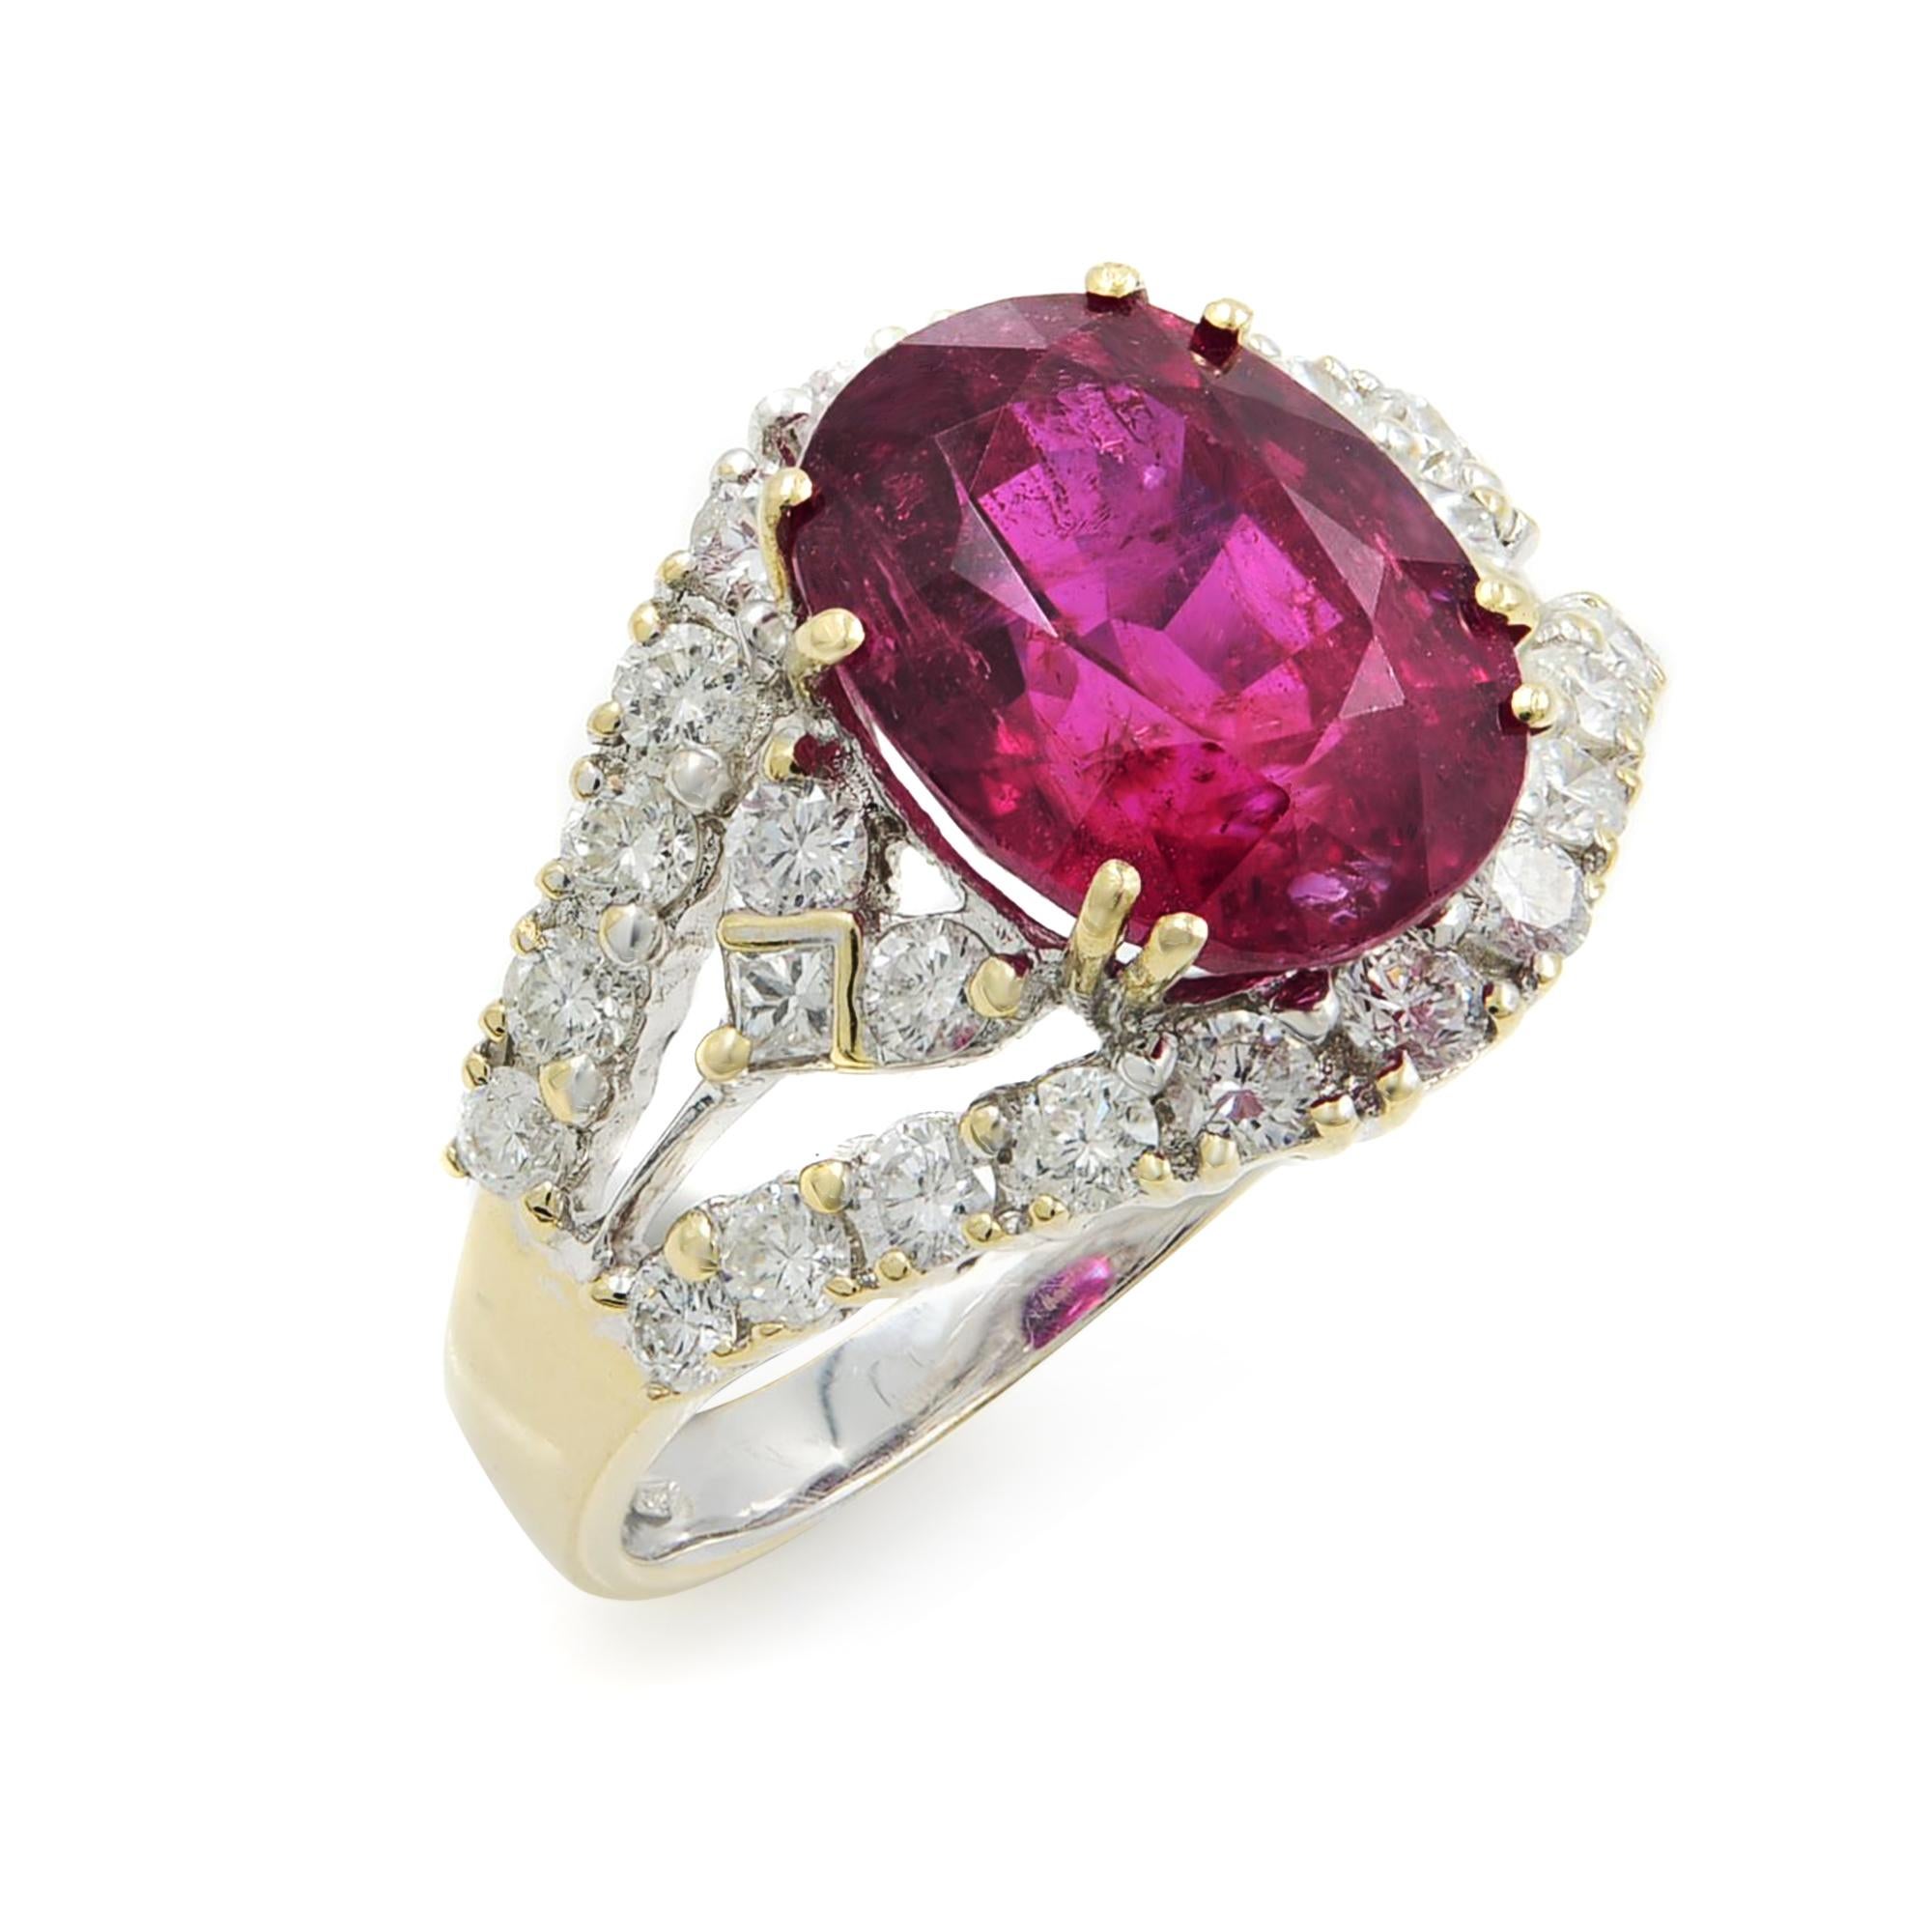 The stunning ring from our Rachel Koen Collection is retro inspired. This 18k two tone yellow and white gold ring will have you walking the red carpet. Lush in color and styling, this precious oval shaped ruby center stone weighs 5.55 carats. In